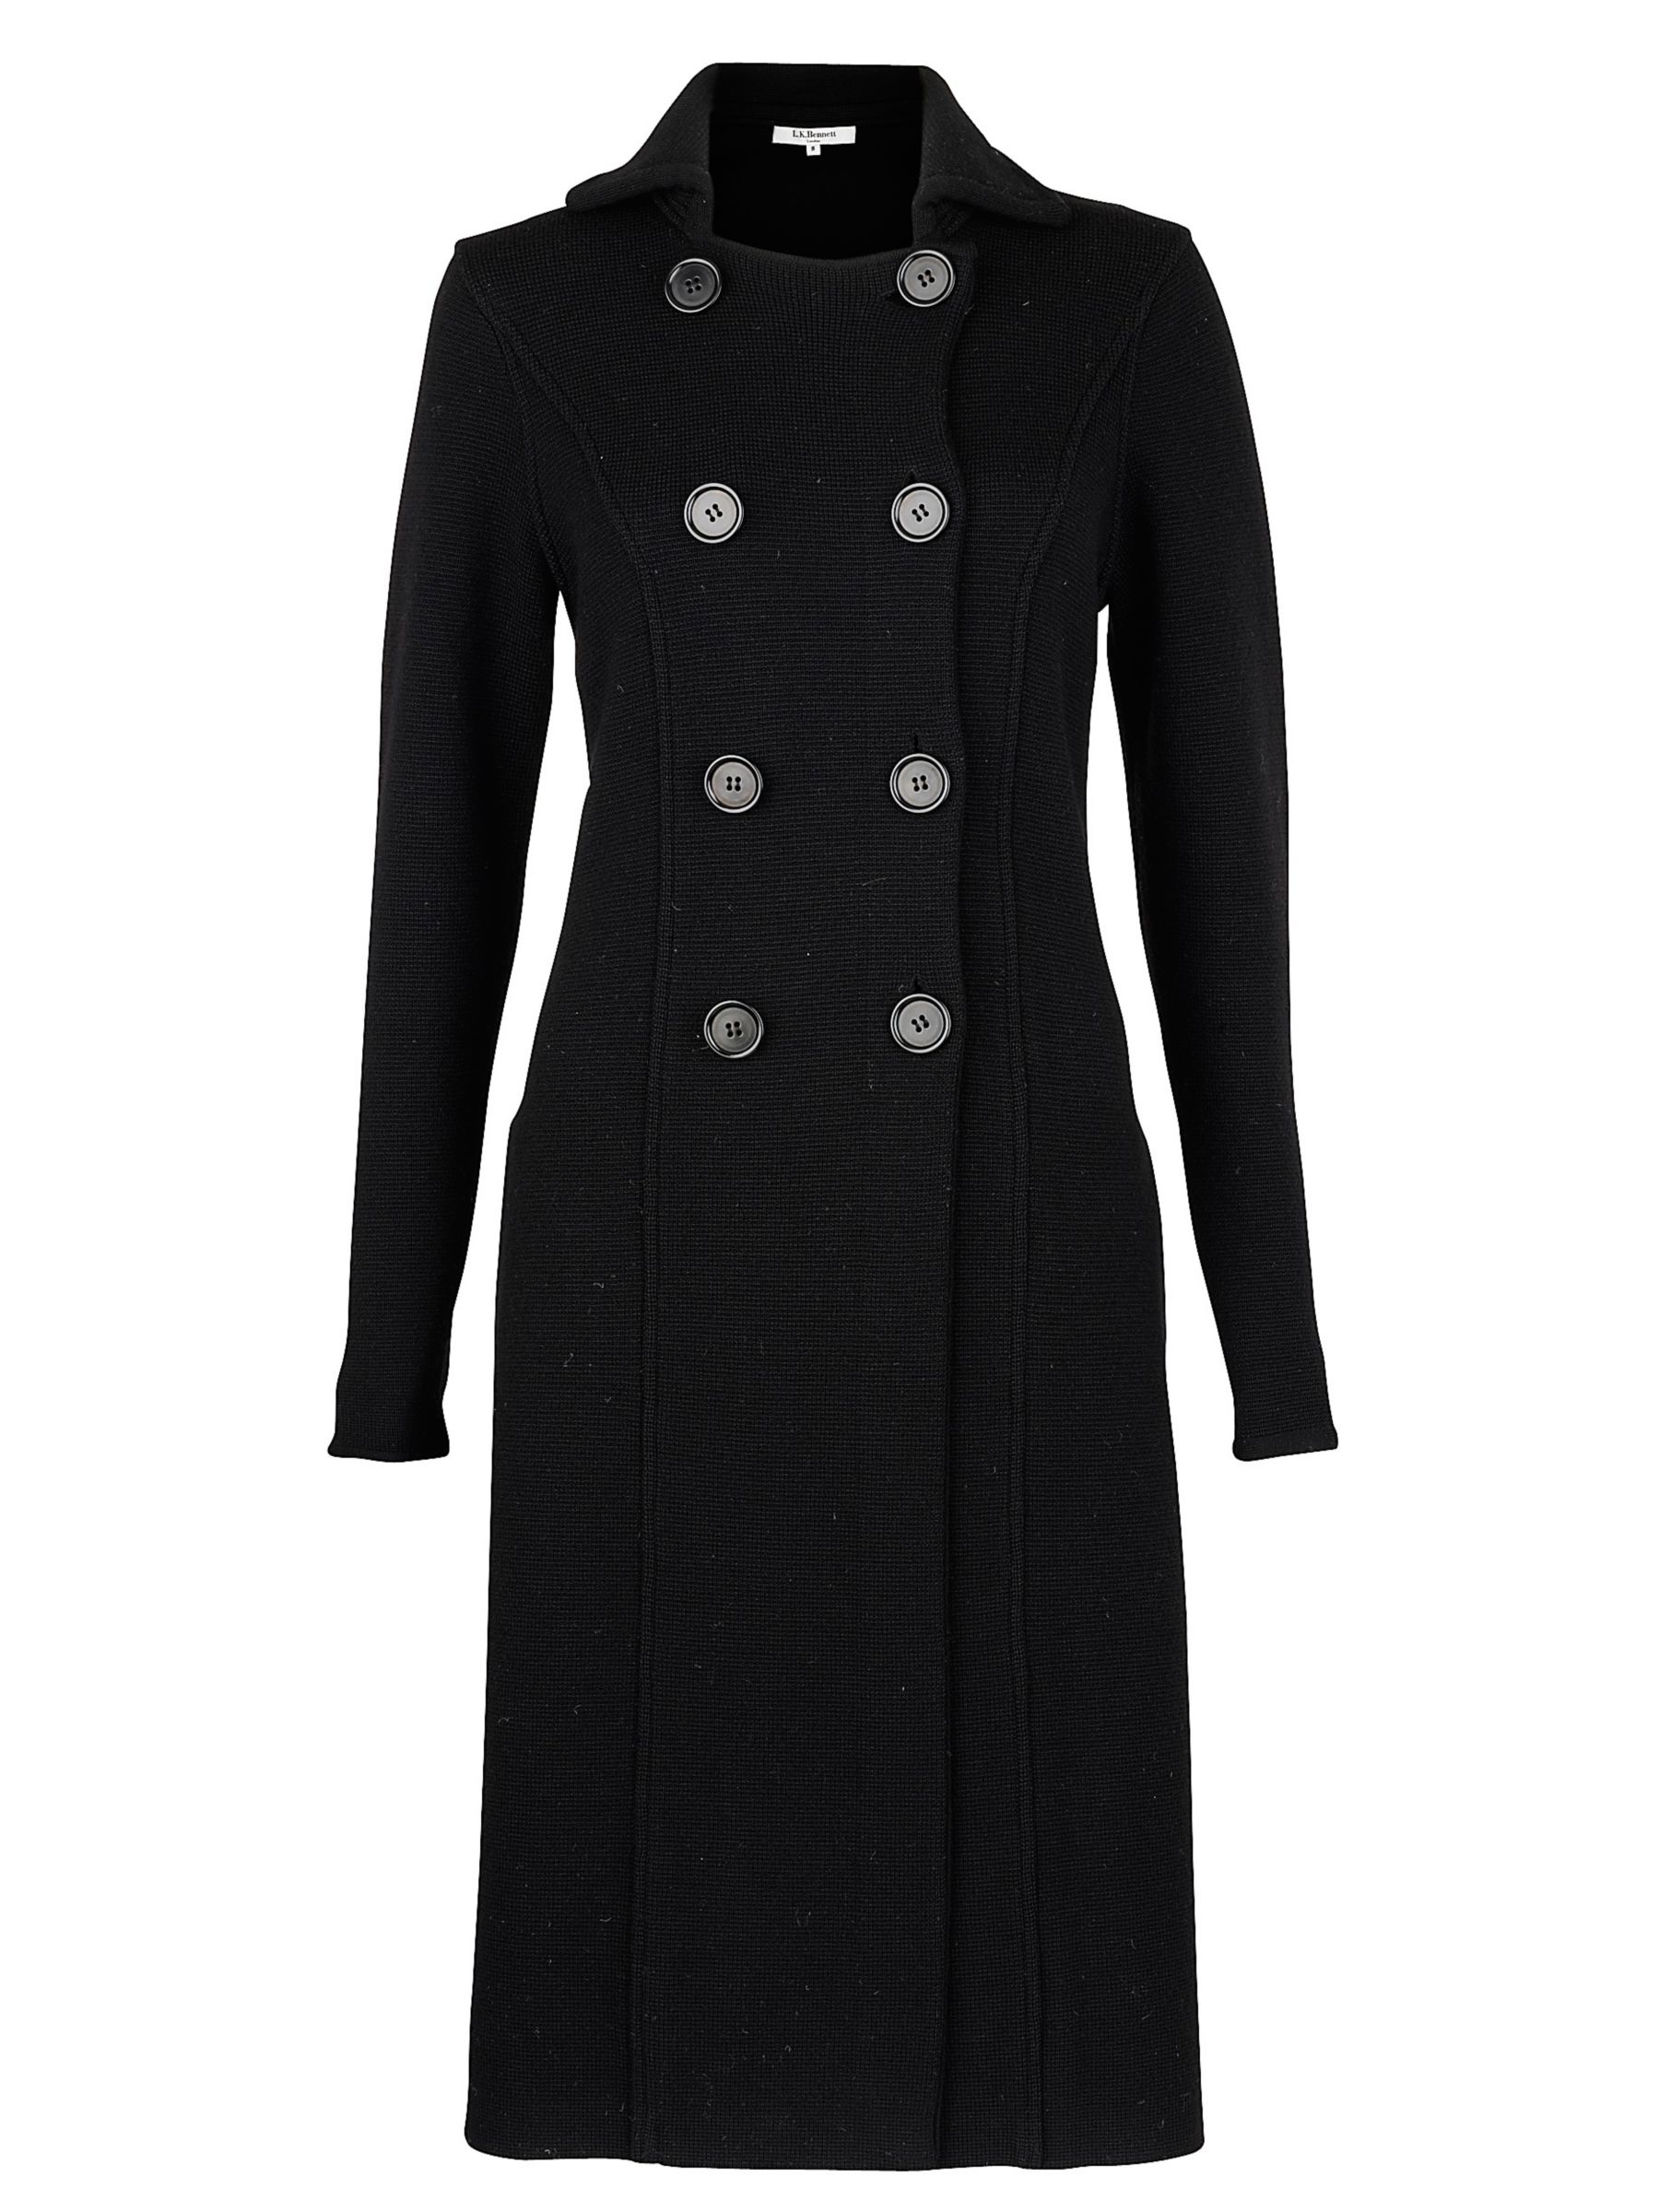 L.K. Bennett Brook Double Breasted Knitted Coat, Black at John Lewis